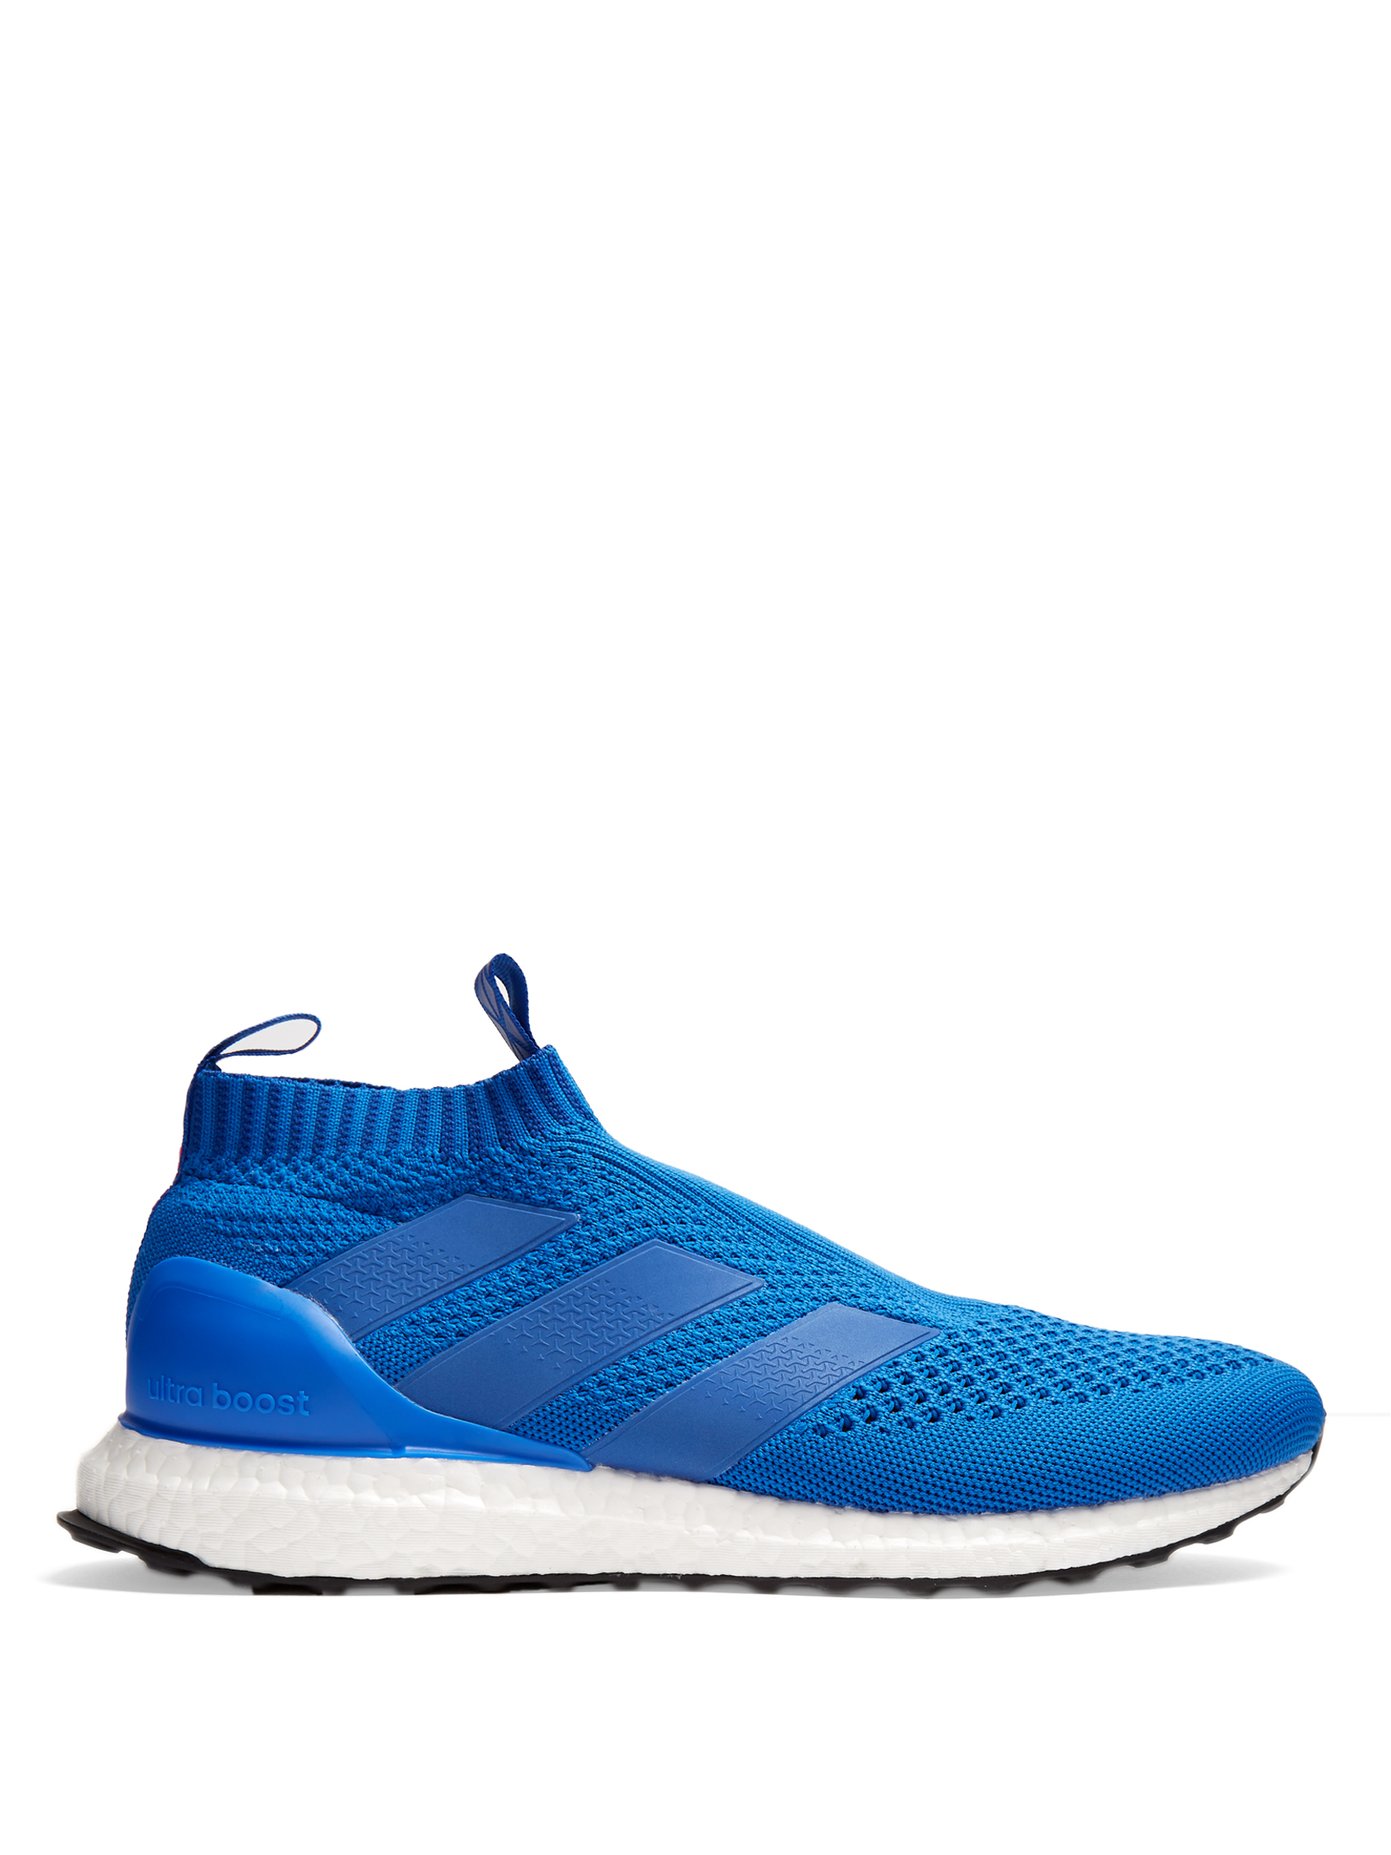 adidas ace 16 trainers